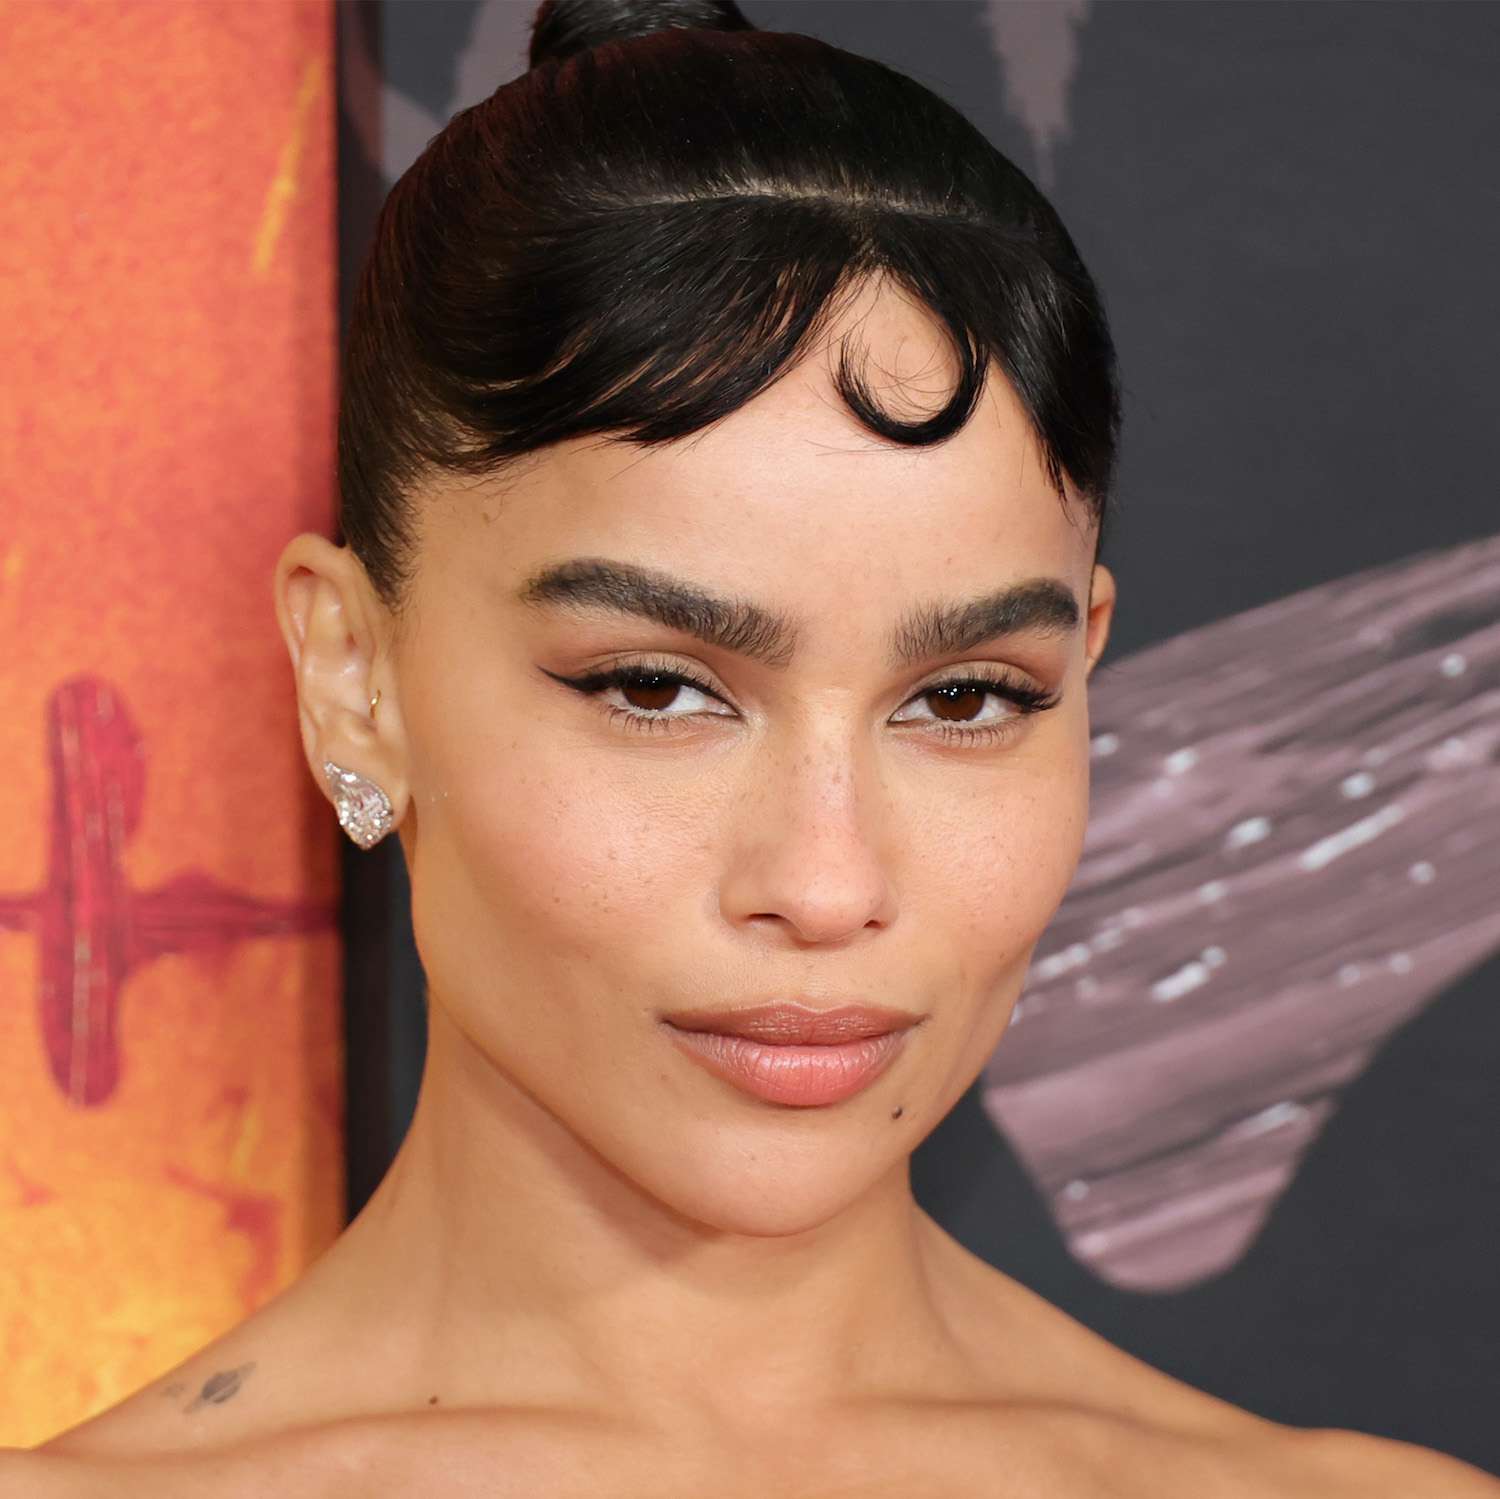 Zoe Kravitz wears an updo with baby bangs with a centered single pin curl